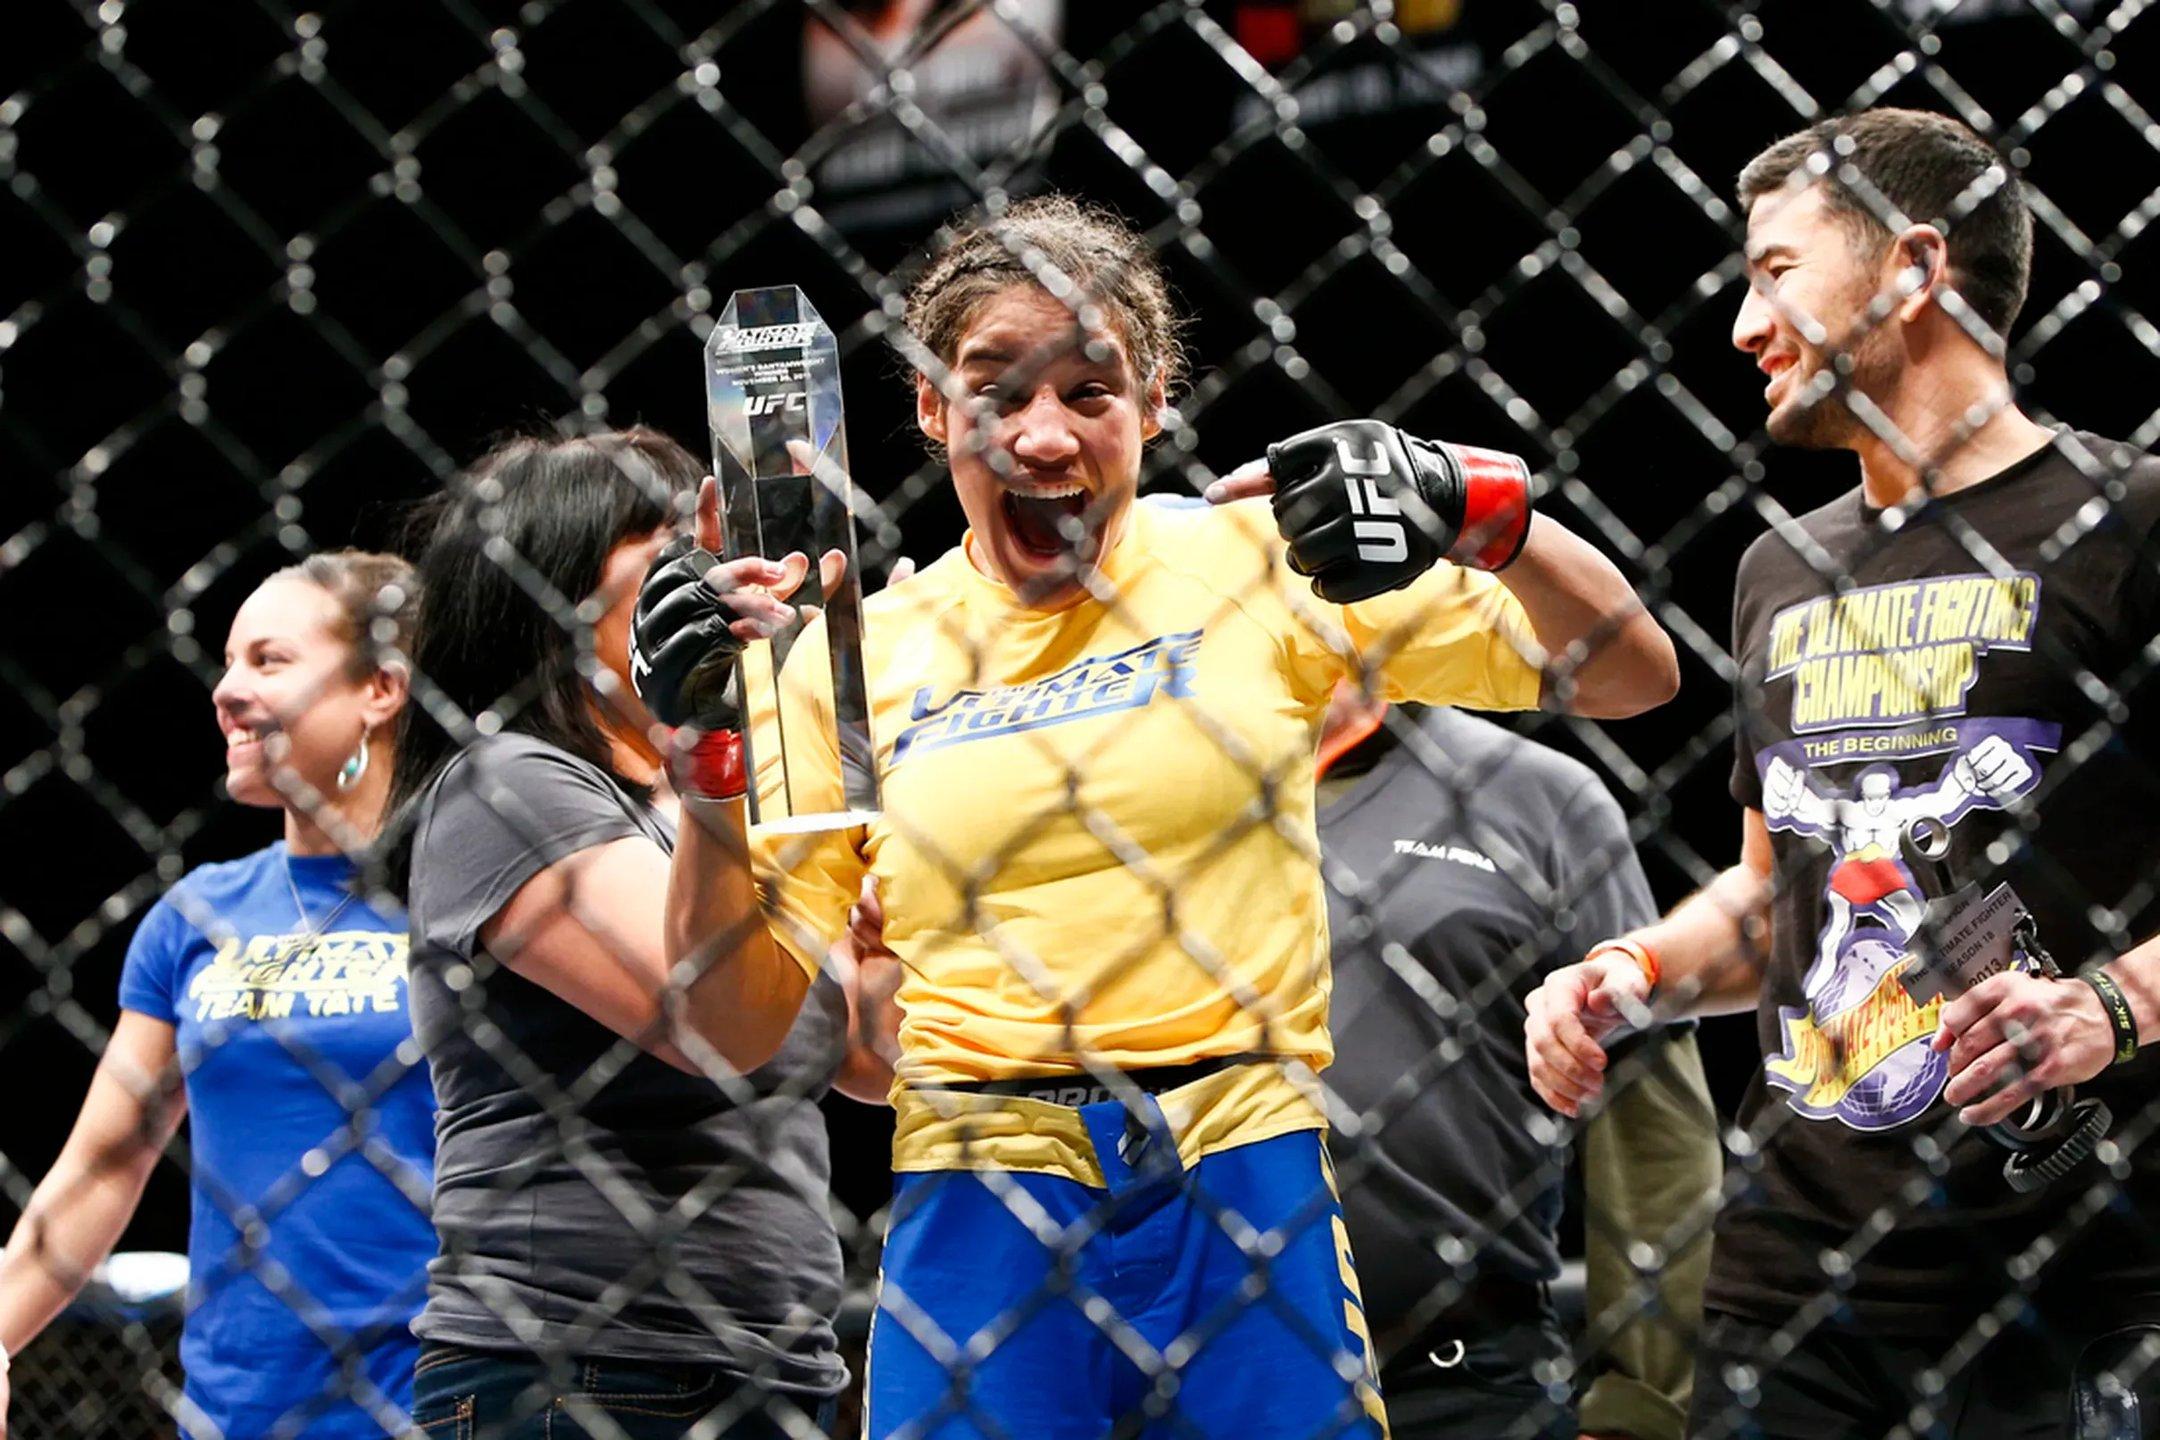 Julianna Peña celebrates her victory on The Ultimate Fighter Finale. Credits to Ester Lin - MMAFighting